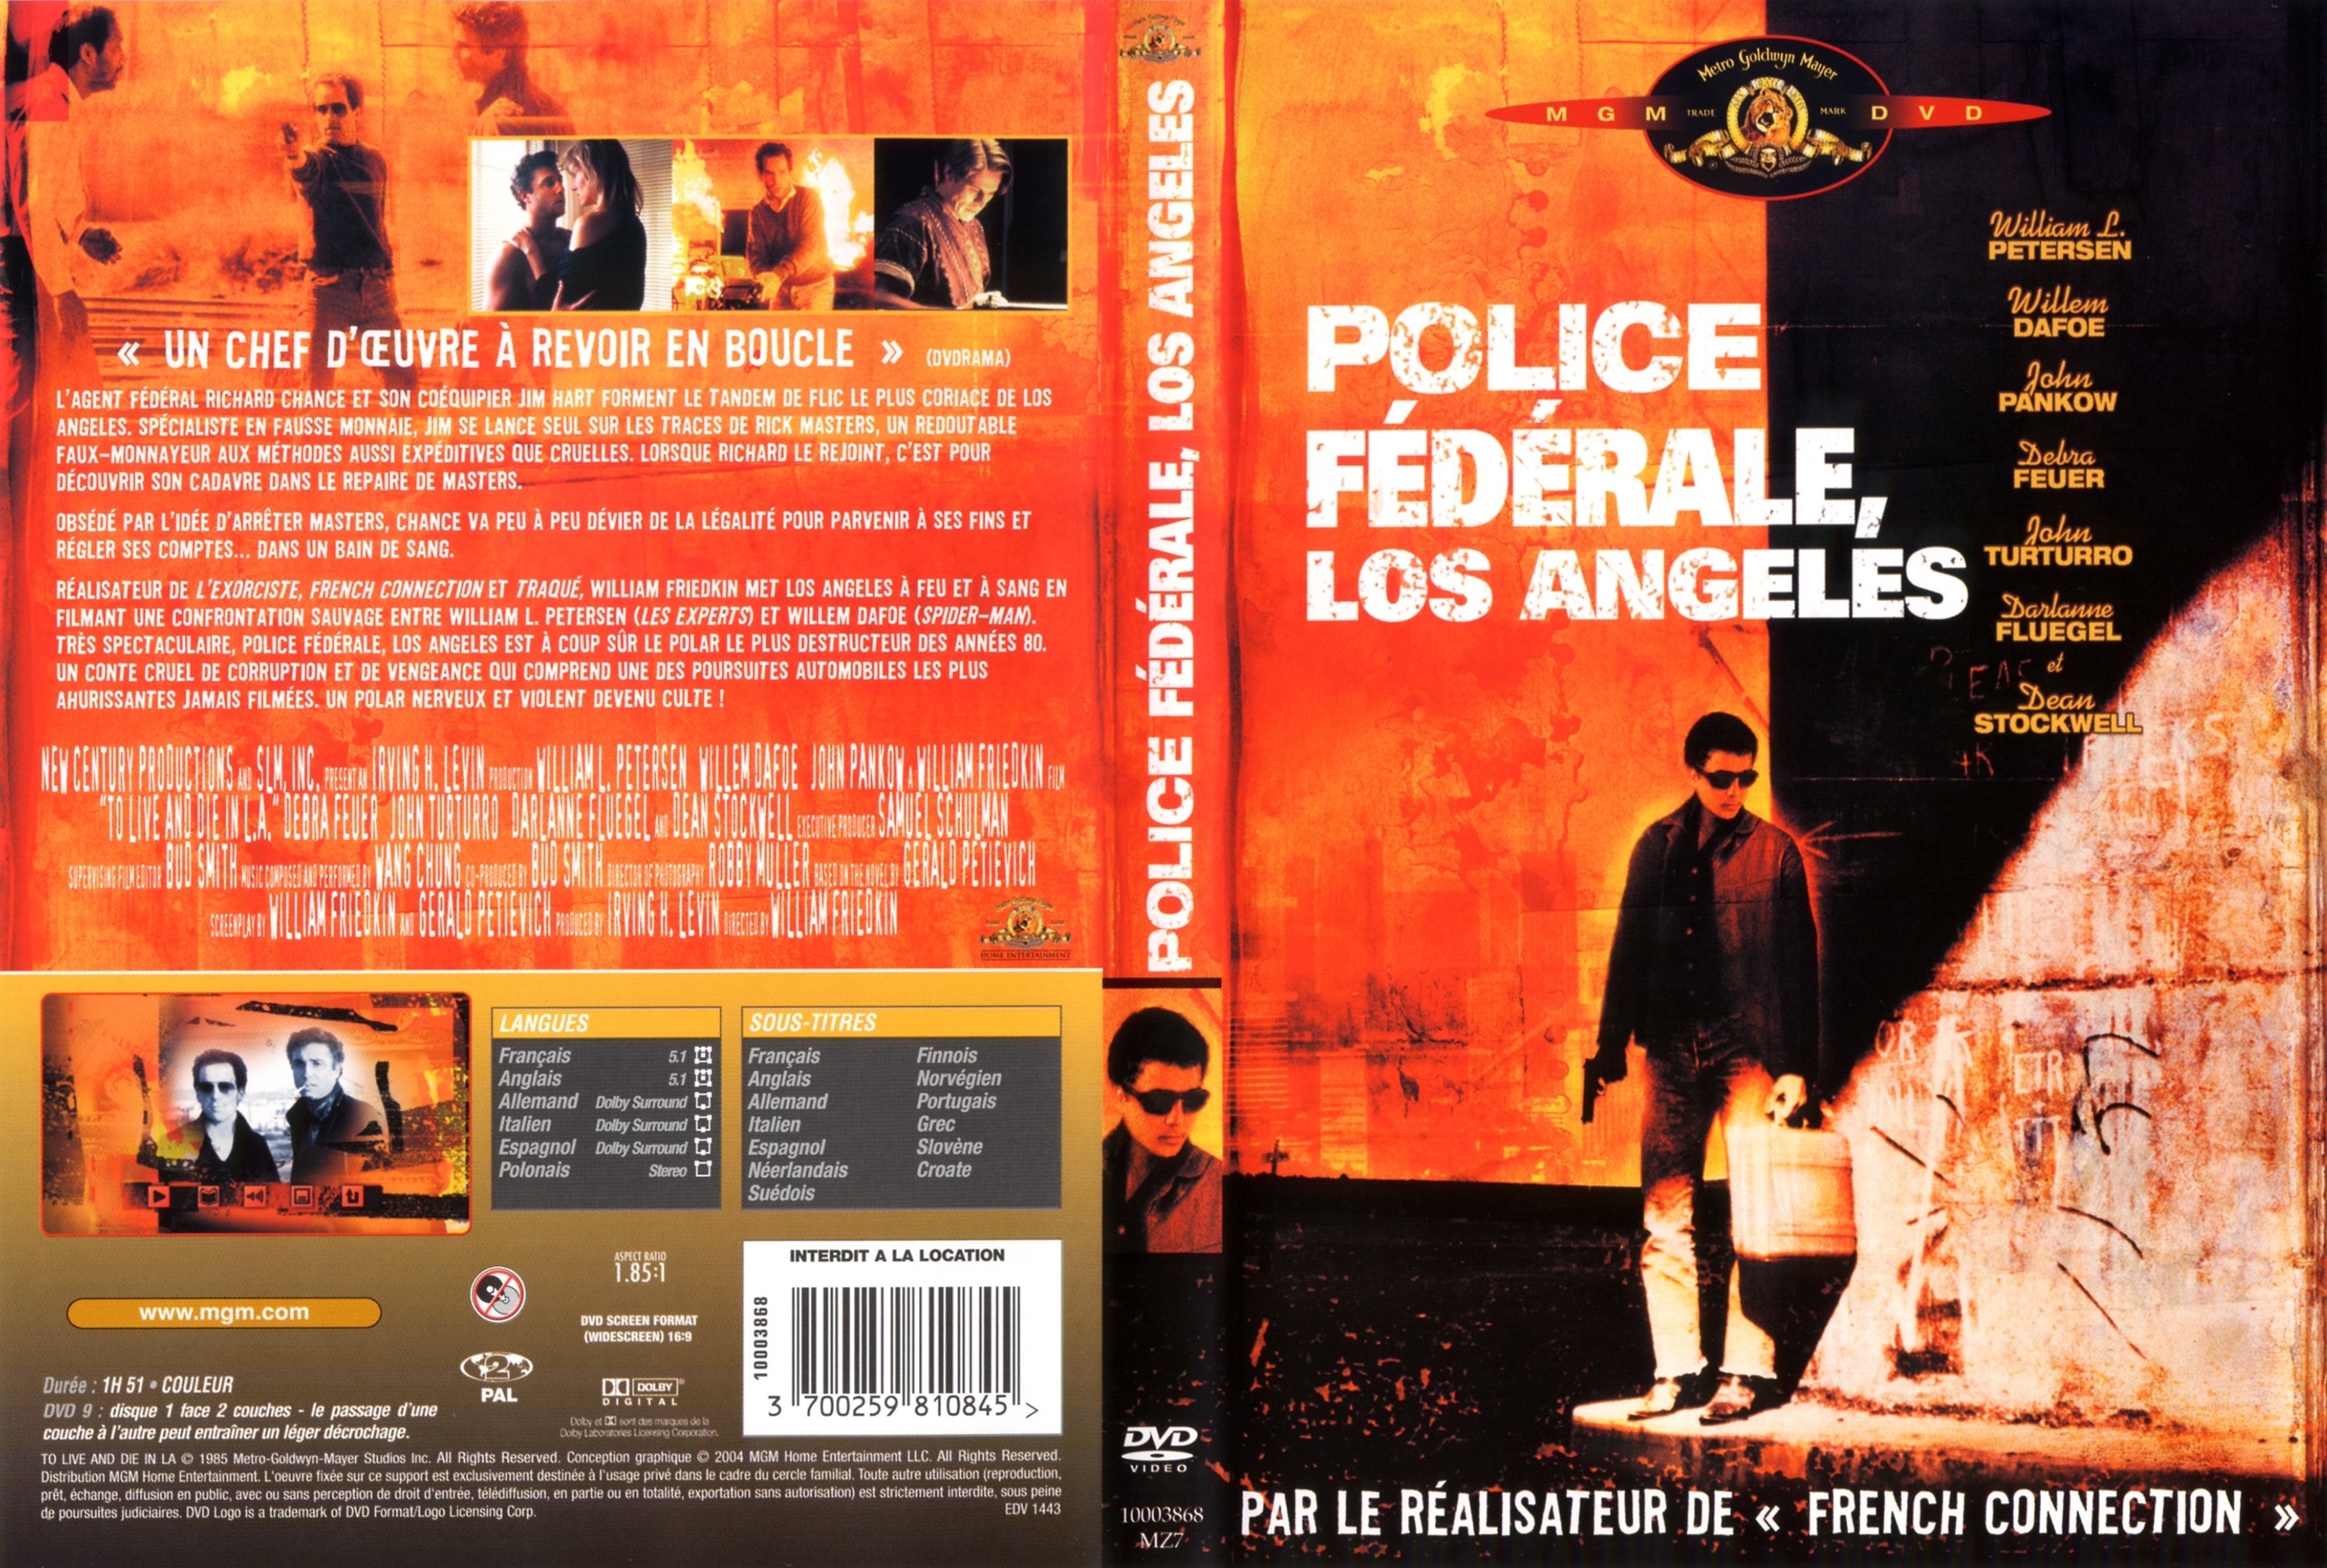 Jaquette DVD Police federale Los Angeles